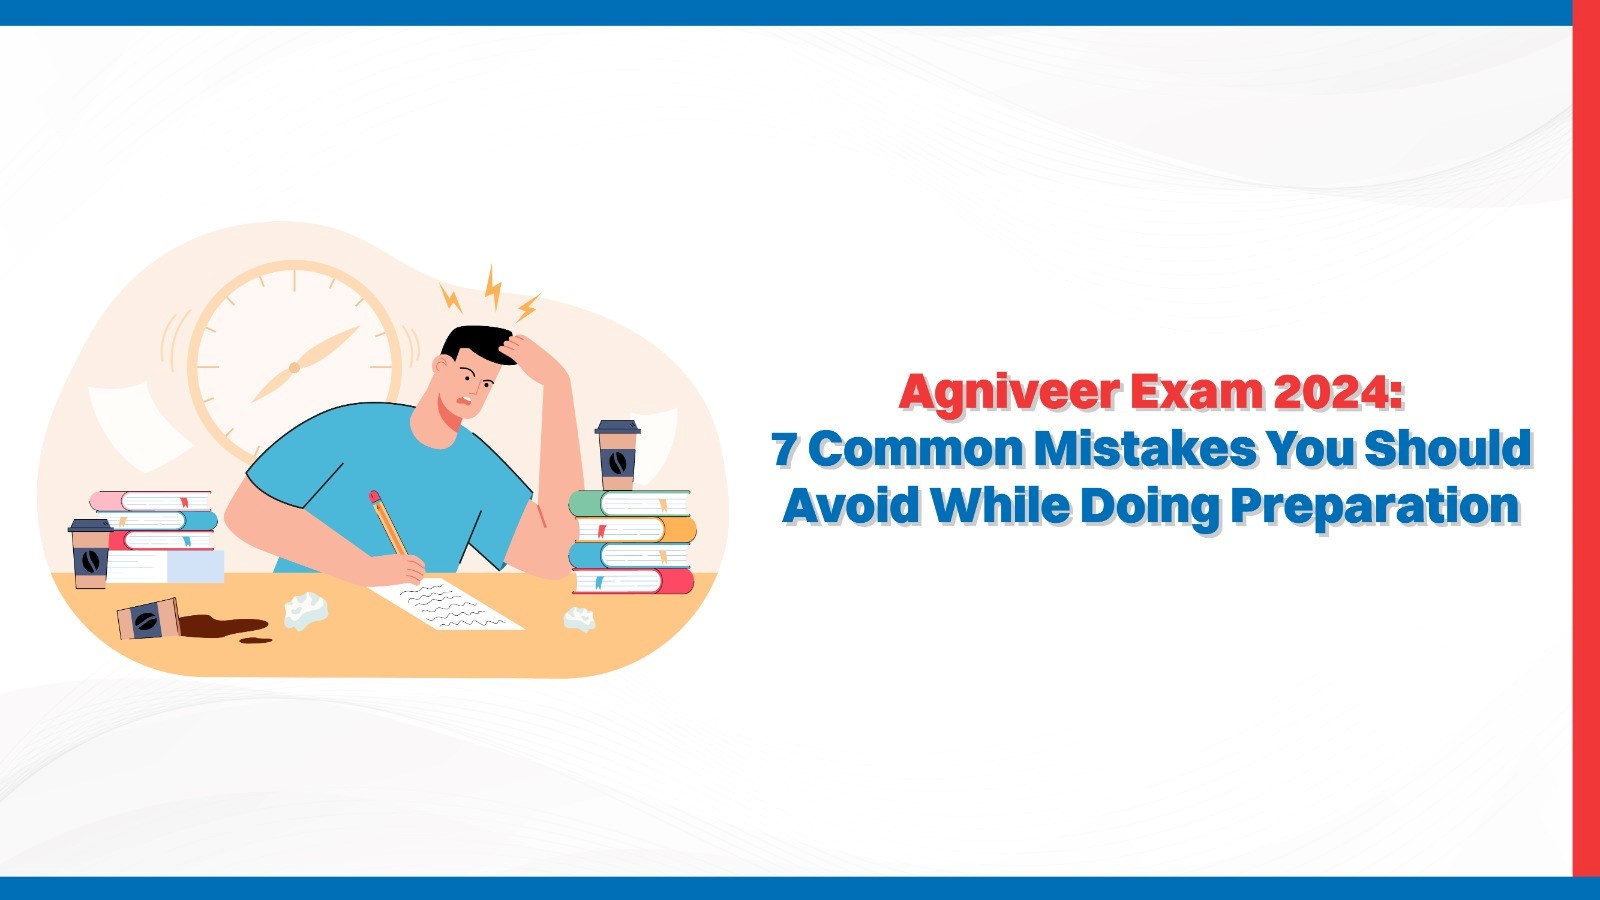 Agniveer Exam 2024 7 Common Mistakes You Should Avoid While Doing Preparation.jpg